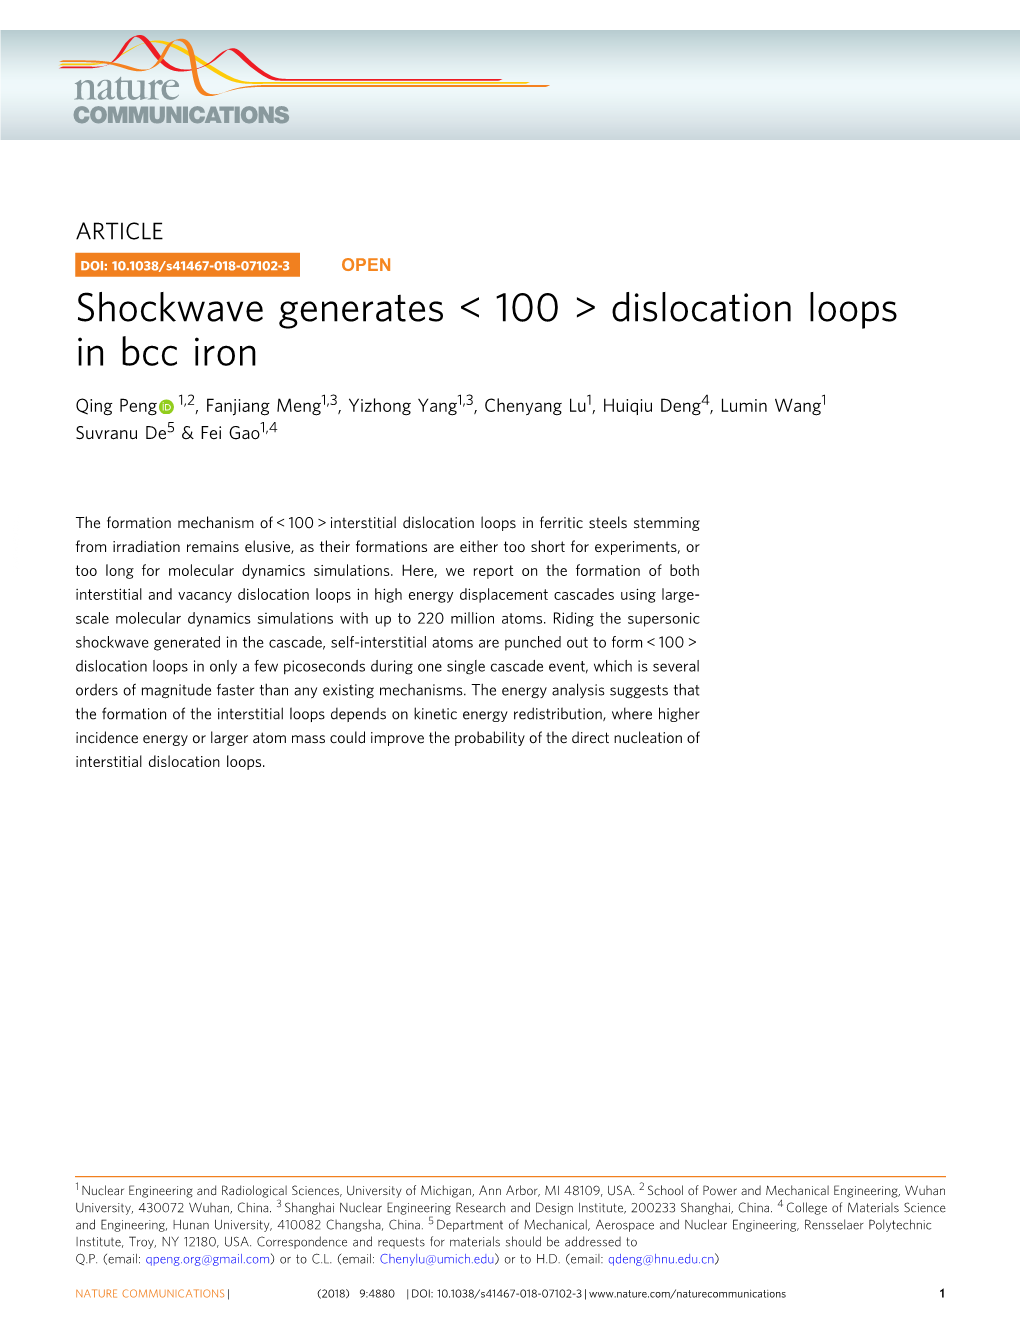 Shockwave Generates &lt; 100 &gt; Dislocation Loops in Bcc Iron